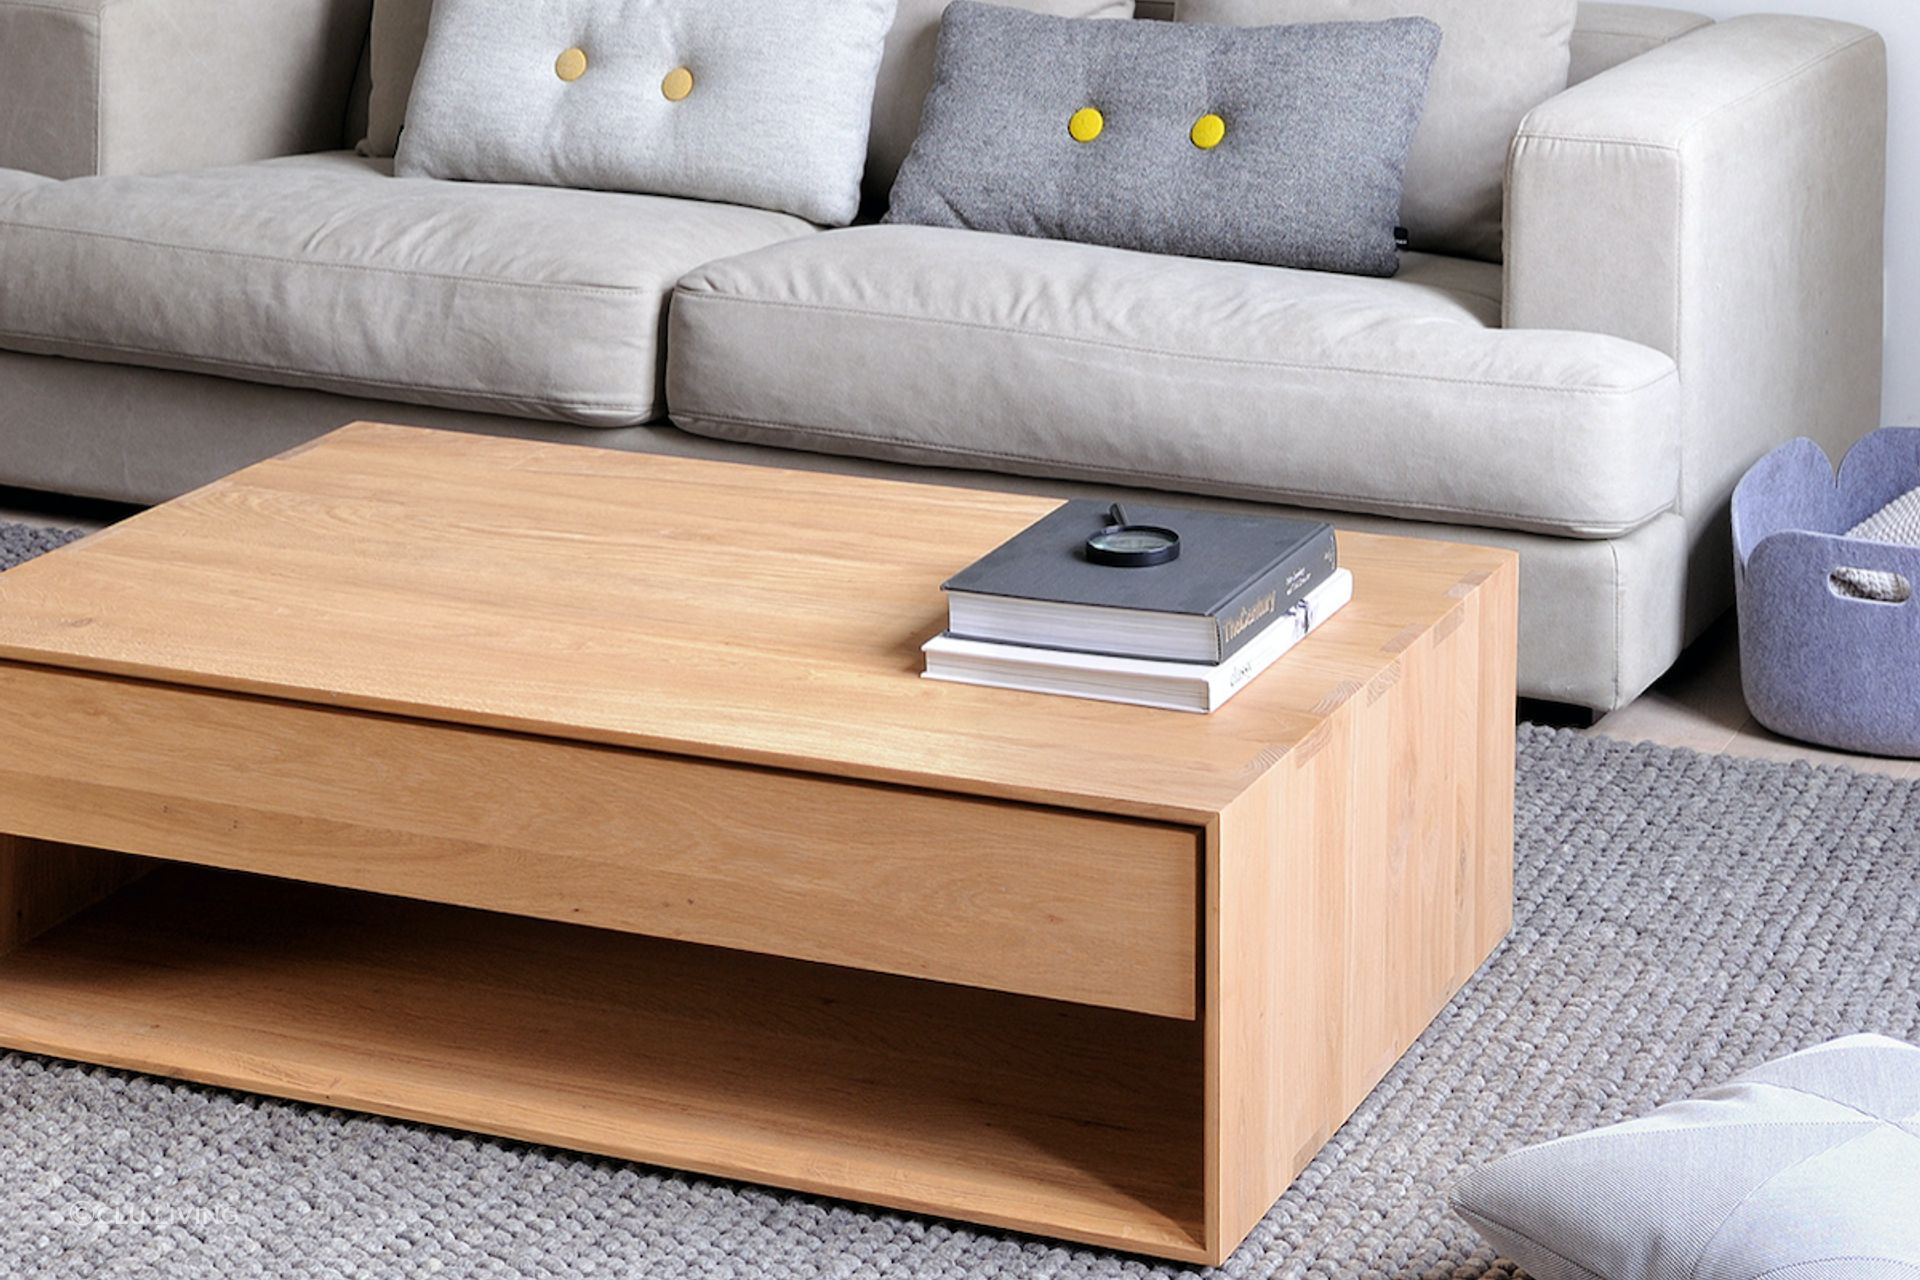 This minimalist coffee table is a practical choice for the modern living room. Featured product: Nordic Coffee Table.